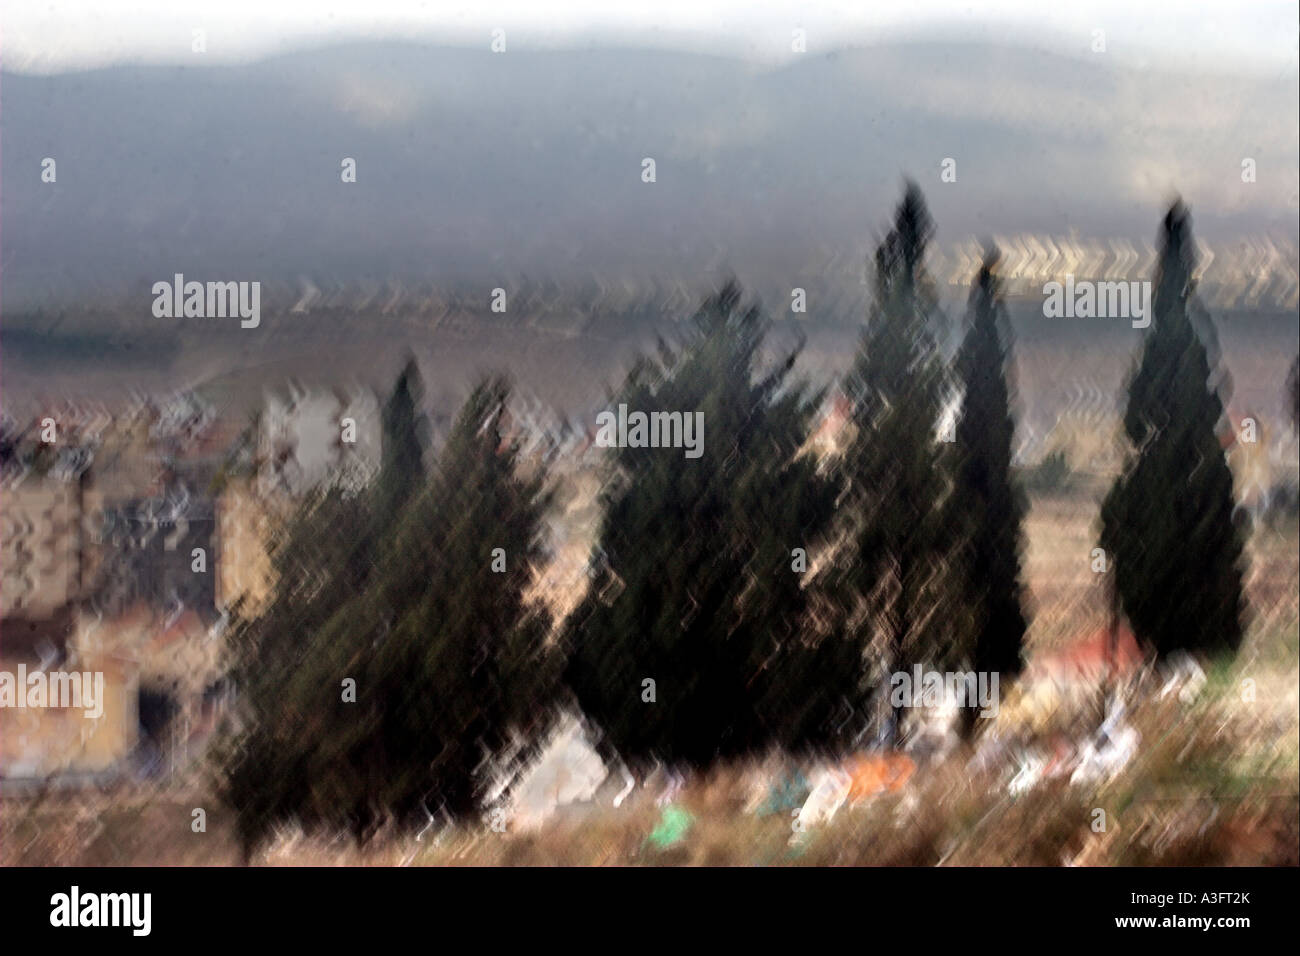 Israel the Lower Galilee A view from Nazareth Digitally manipulated image with motion blur and fuzziness Stock Photo